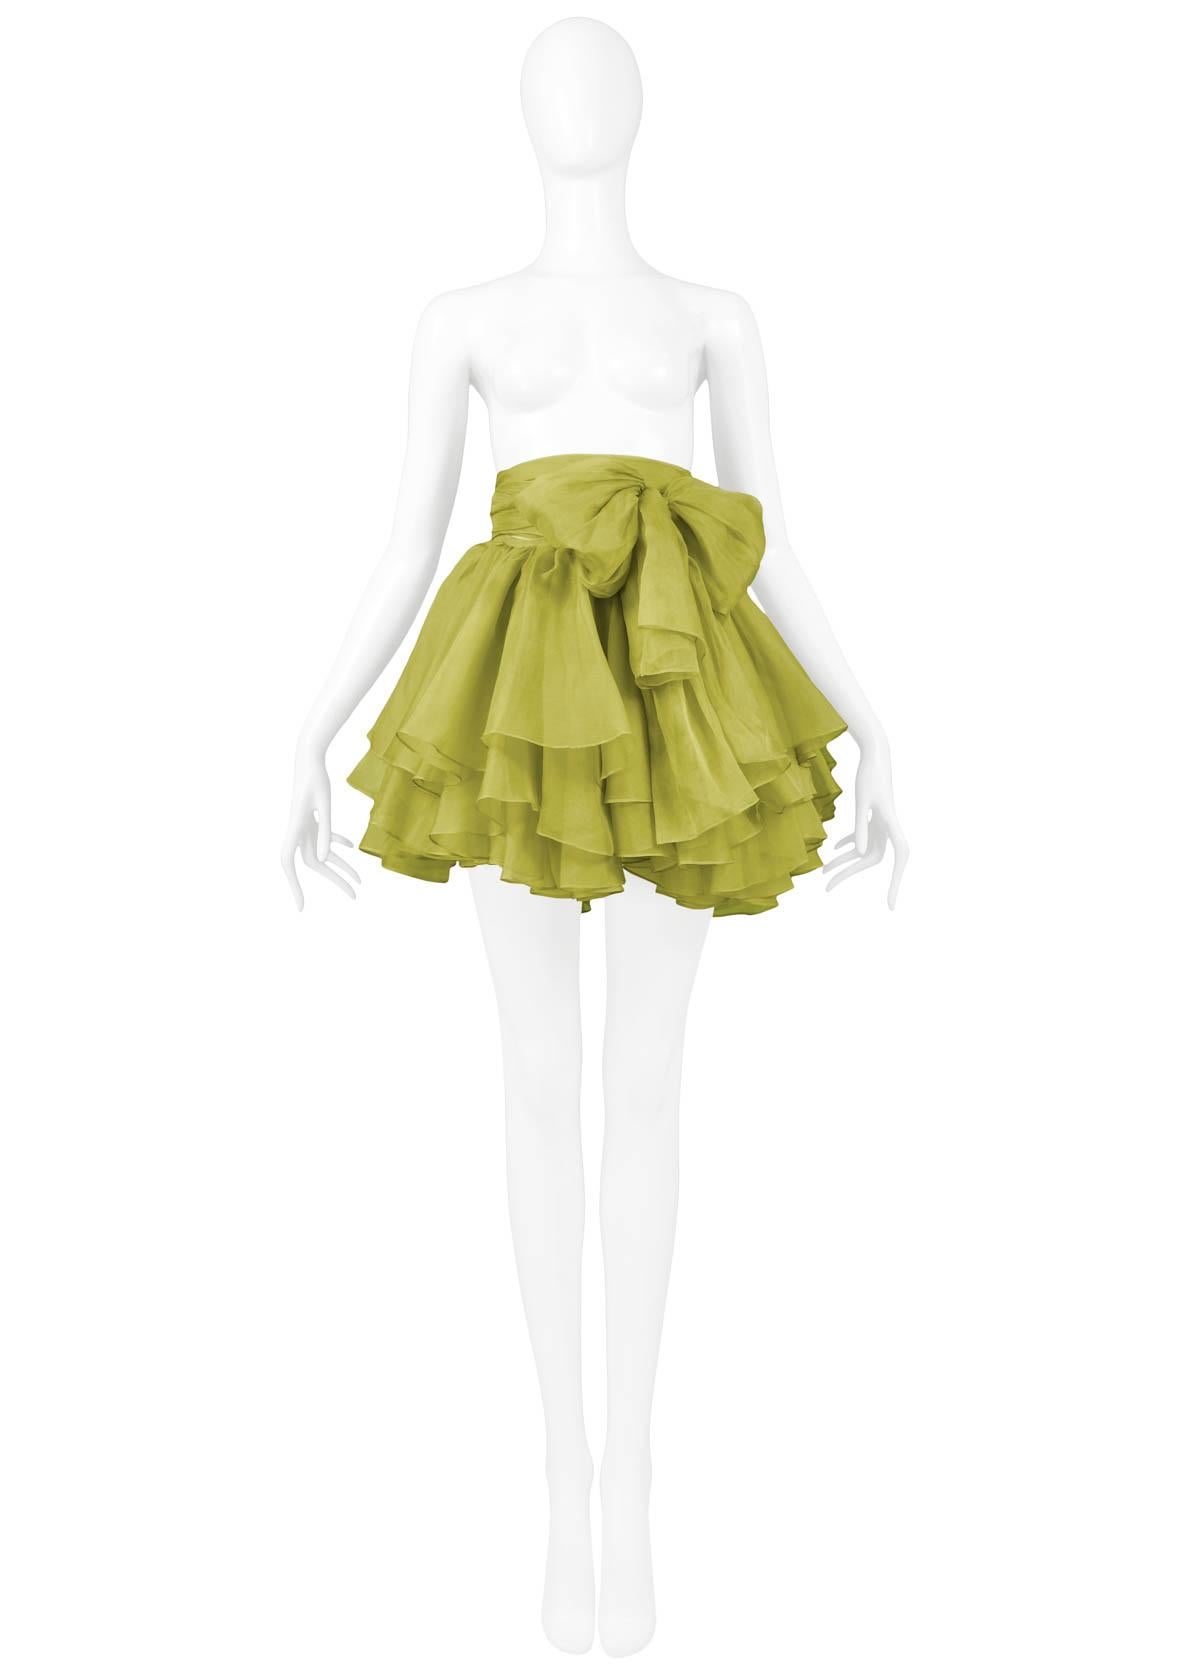 Vintage Complice green organza wrap-around pouf skirt featuring an adjustable waist, ruffles, and attached belt that ties into a bow. From the 1991 Collection.  This skirt has holes along the waistband's wrap ties of the skirt connecting to the